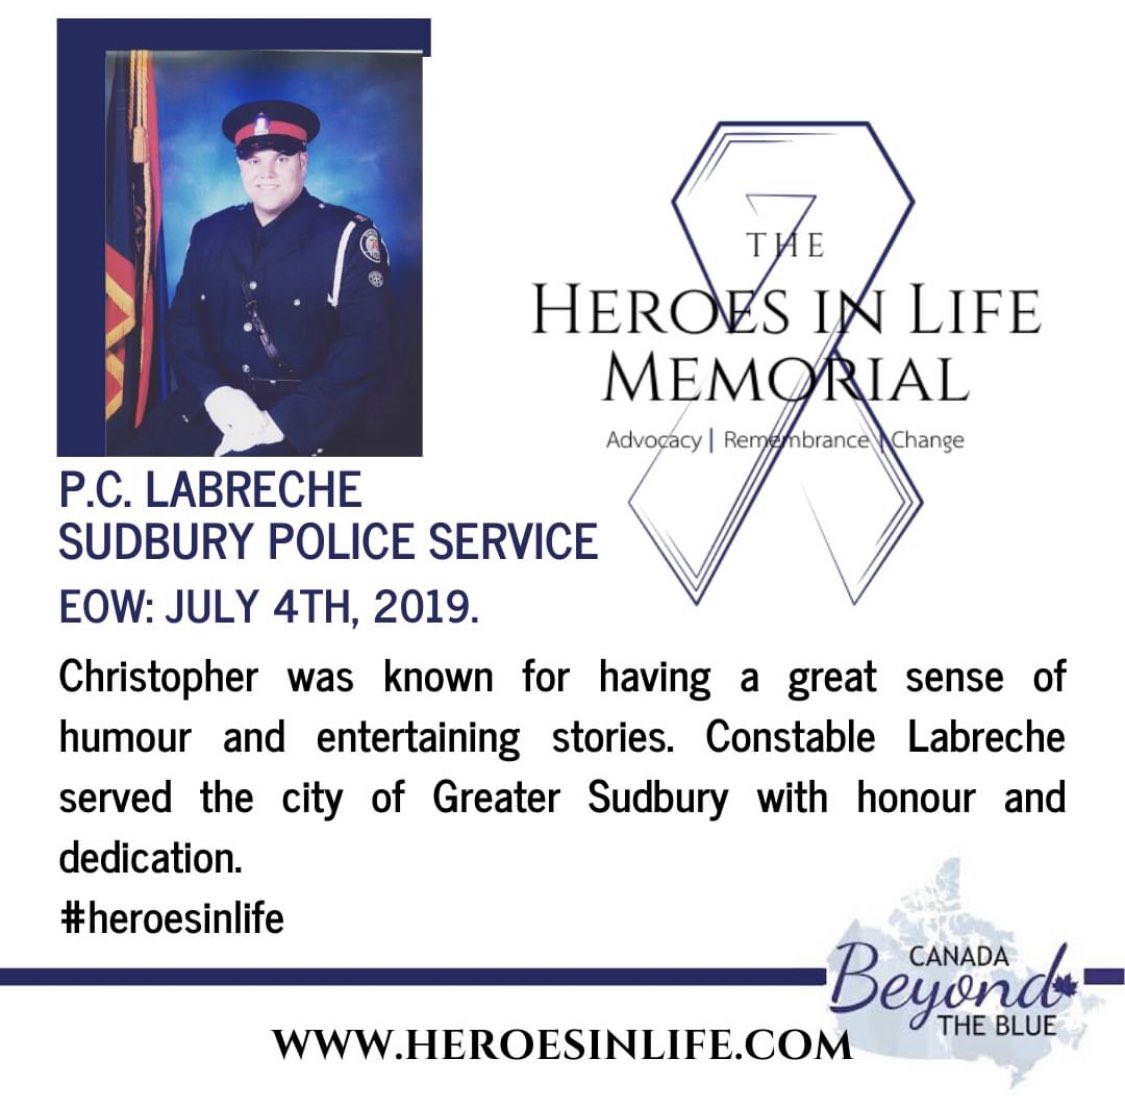 The Ontario Police Heroes in Life Memorial remembers & honours Constable Christopher Labreche who proudly served the Greater Sudbury Area with honour and dedication. We are sending strength and love to his family, friends and colleagues. #HeroInLife #becauseofthelineofduty